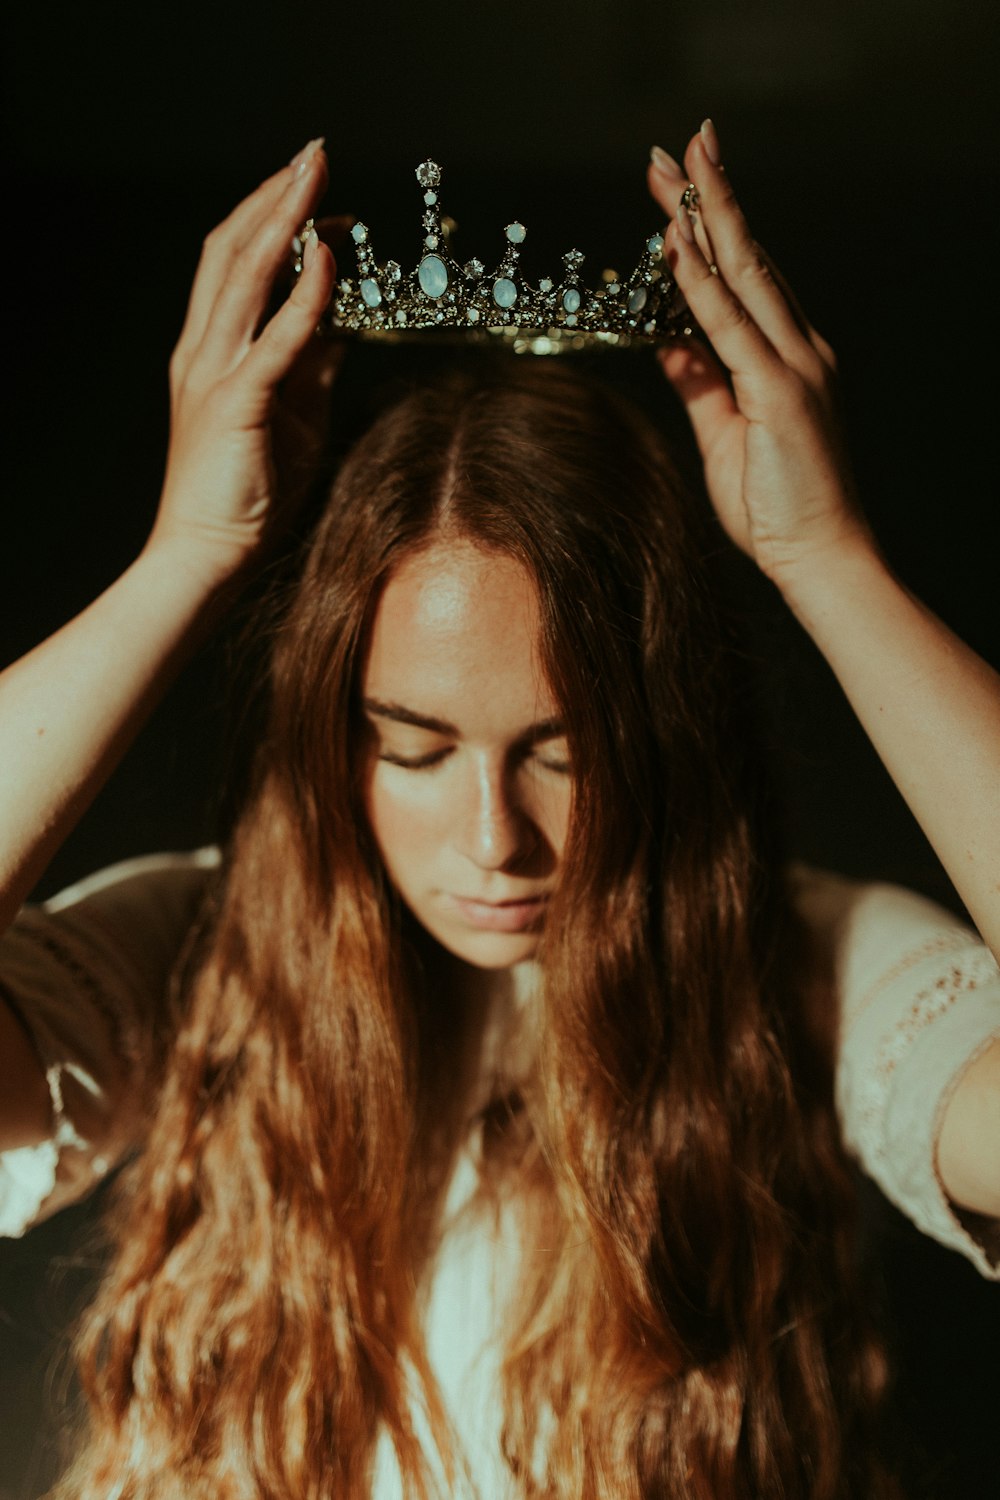 woman putting silver-colored tiara on her head